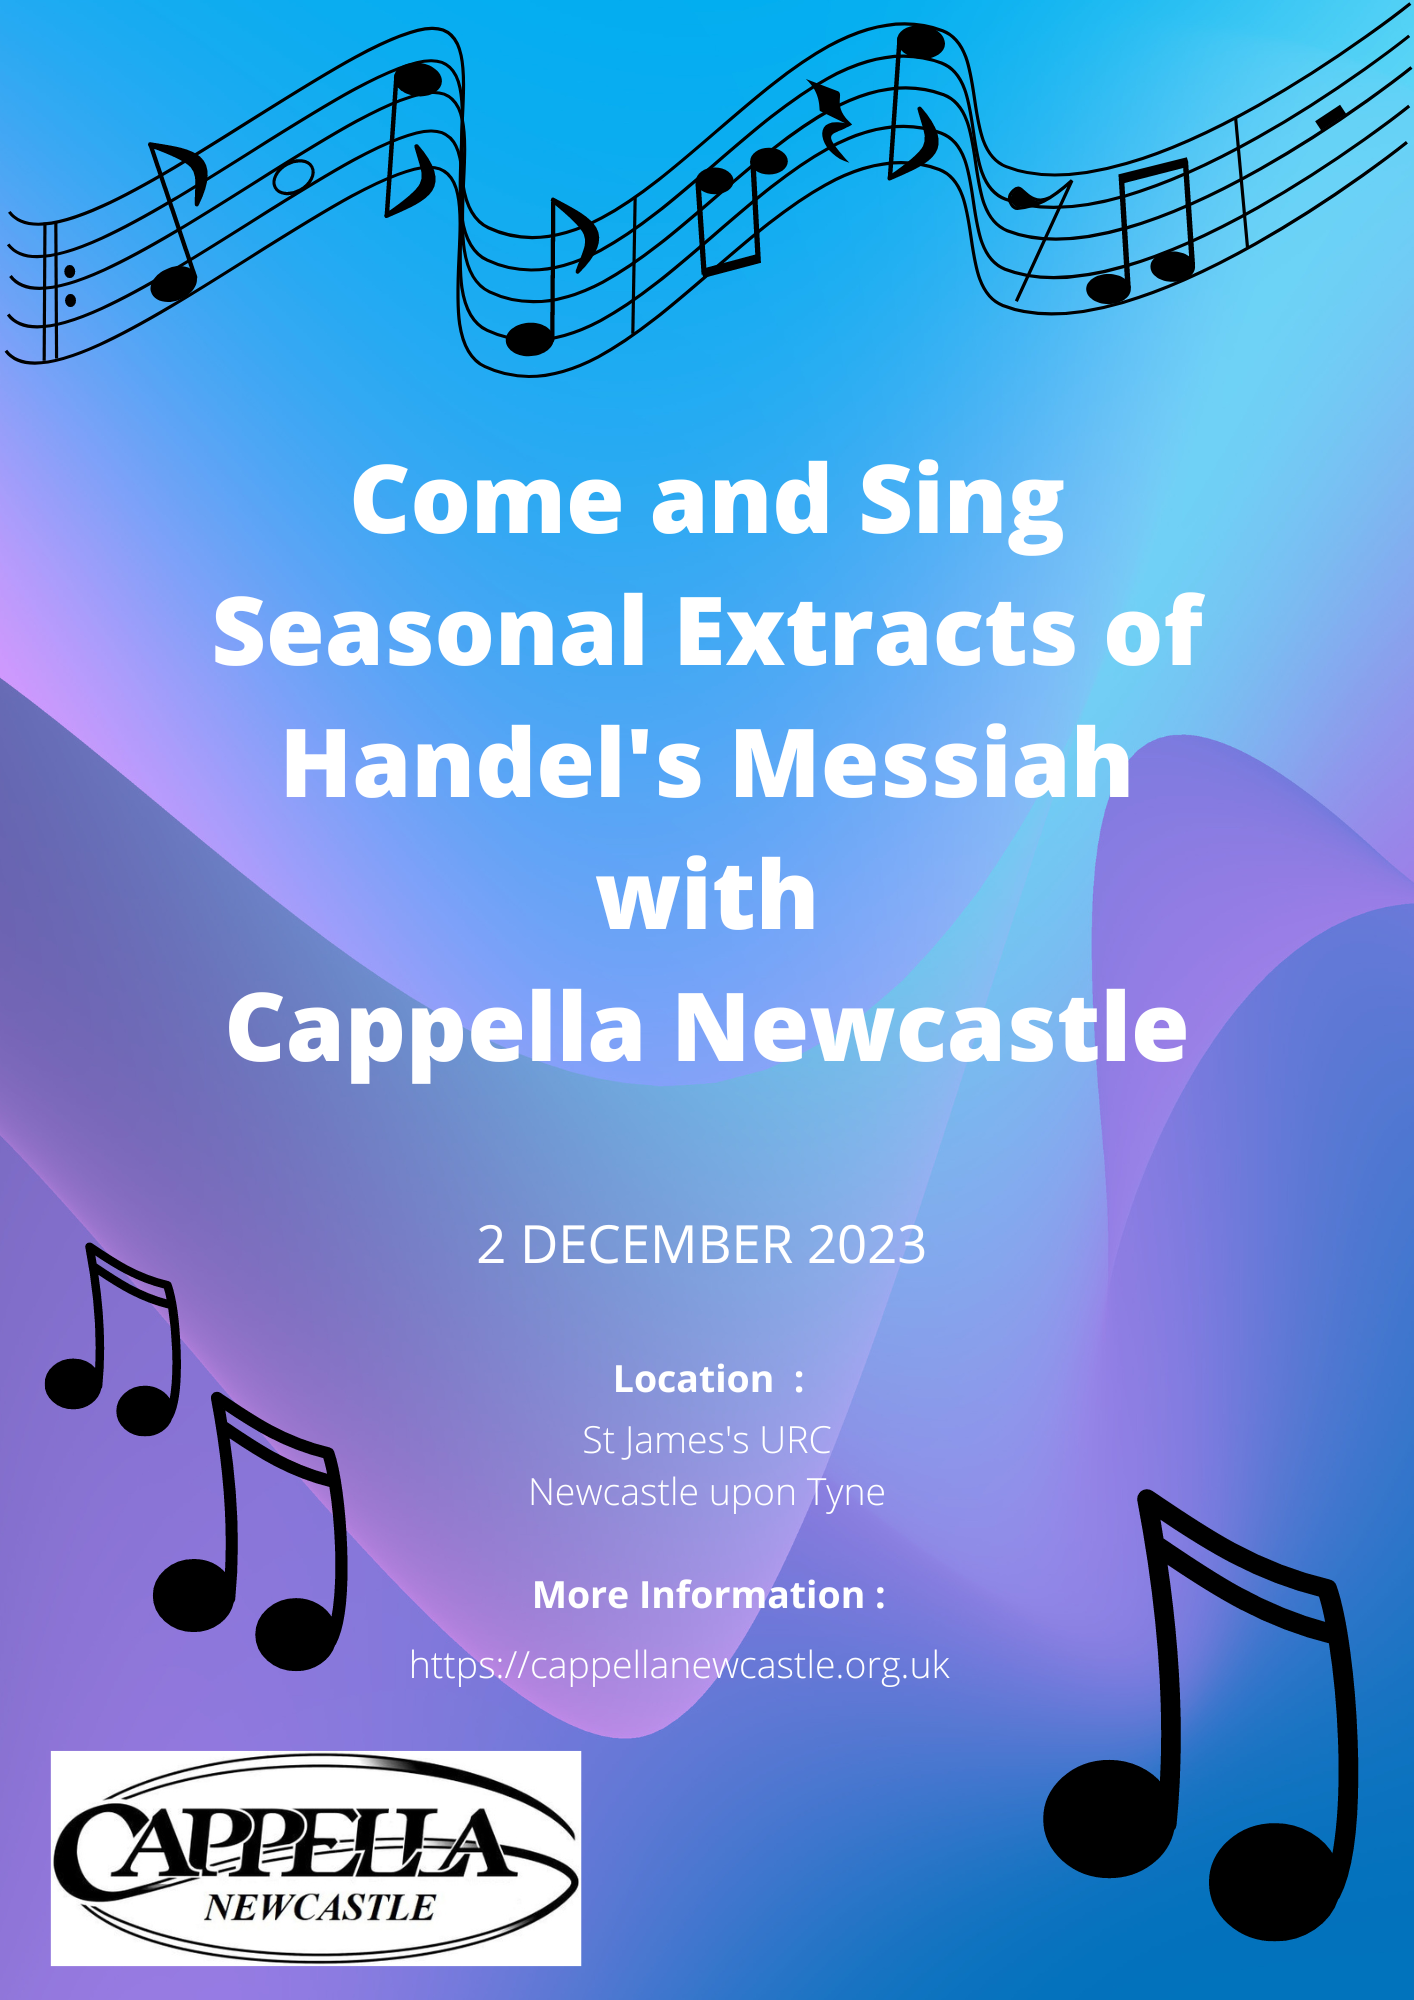 Cappella Workshop "Come and Sing Messiah"